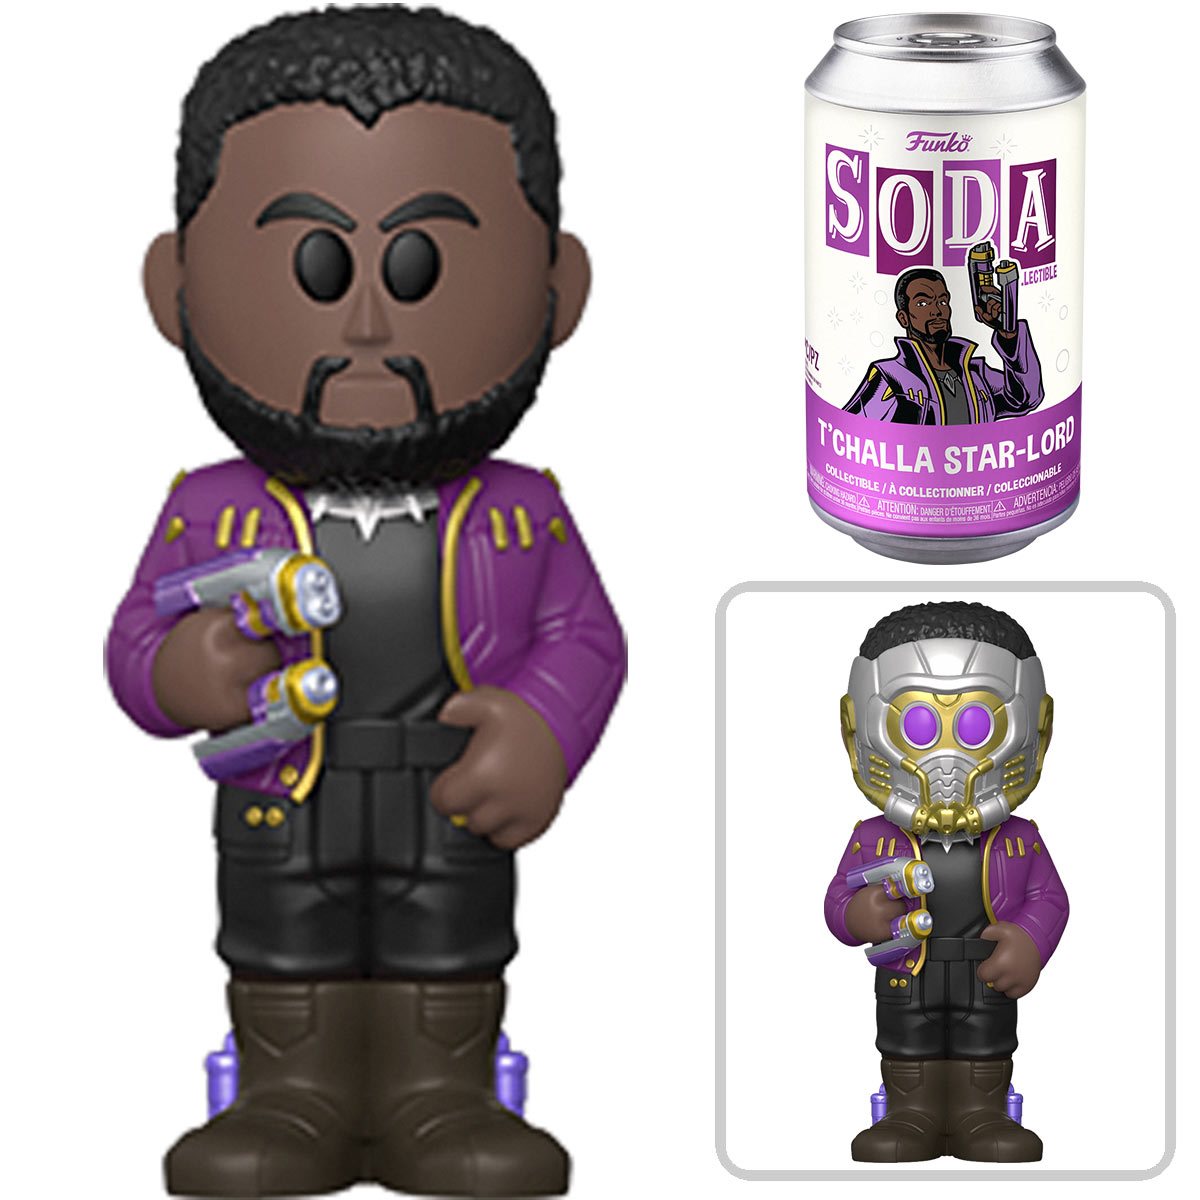 Vinyl Soda: What If - Starlord T'Challa w/ Chance of Chase Funko Soda